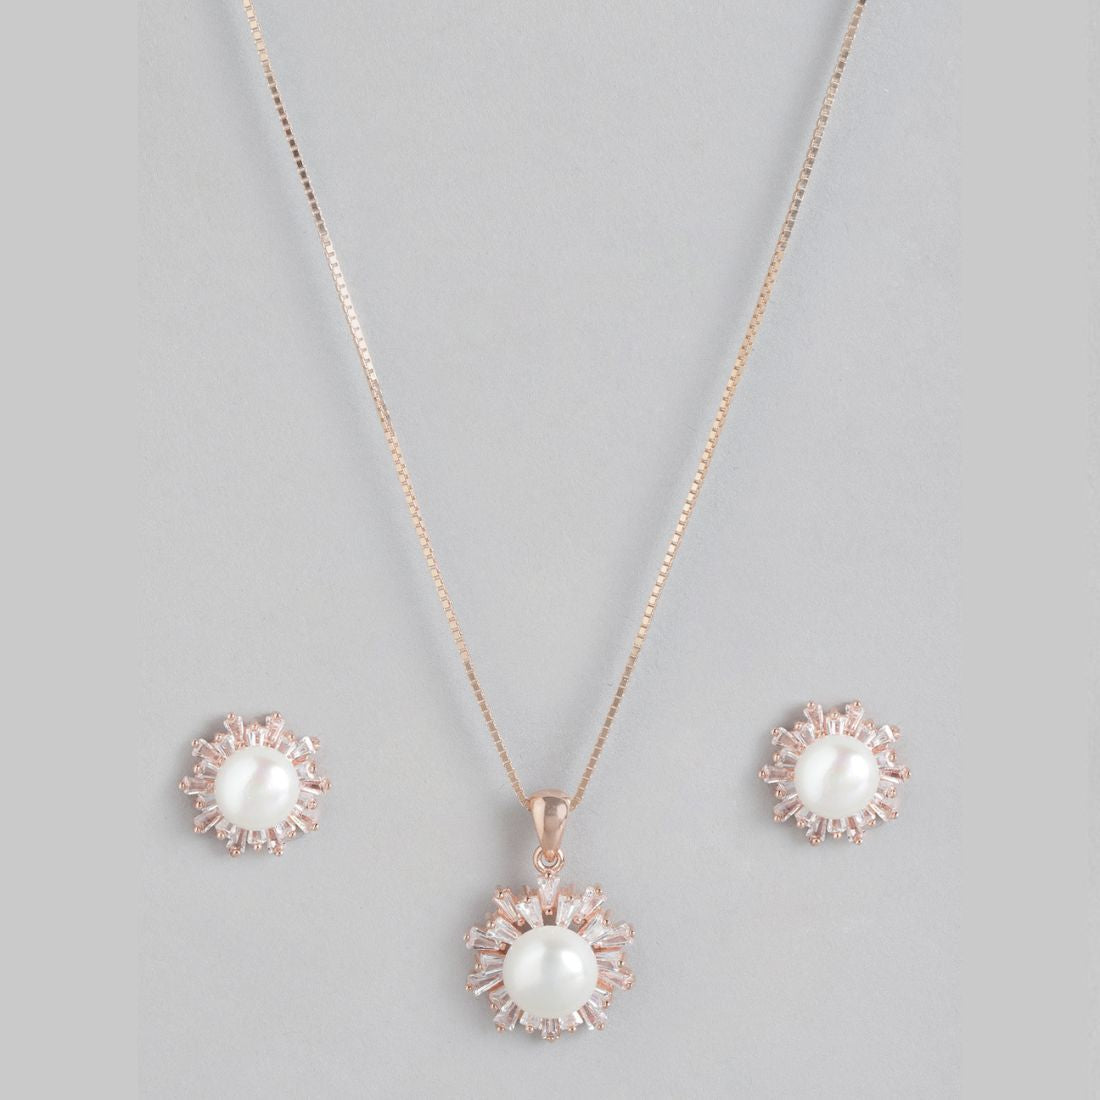 Pearlescent Radiance Rose Gold-Plated 925 Sterling Silver Jewelry Set